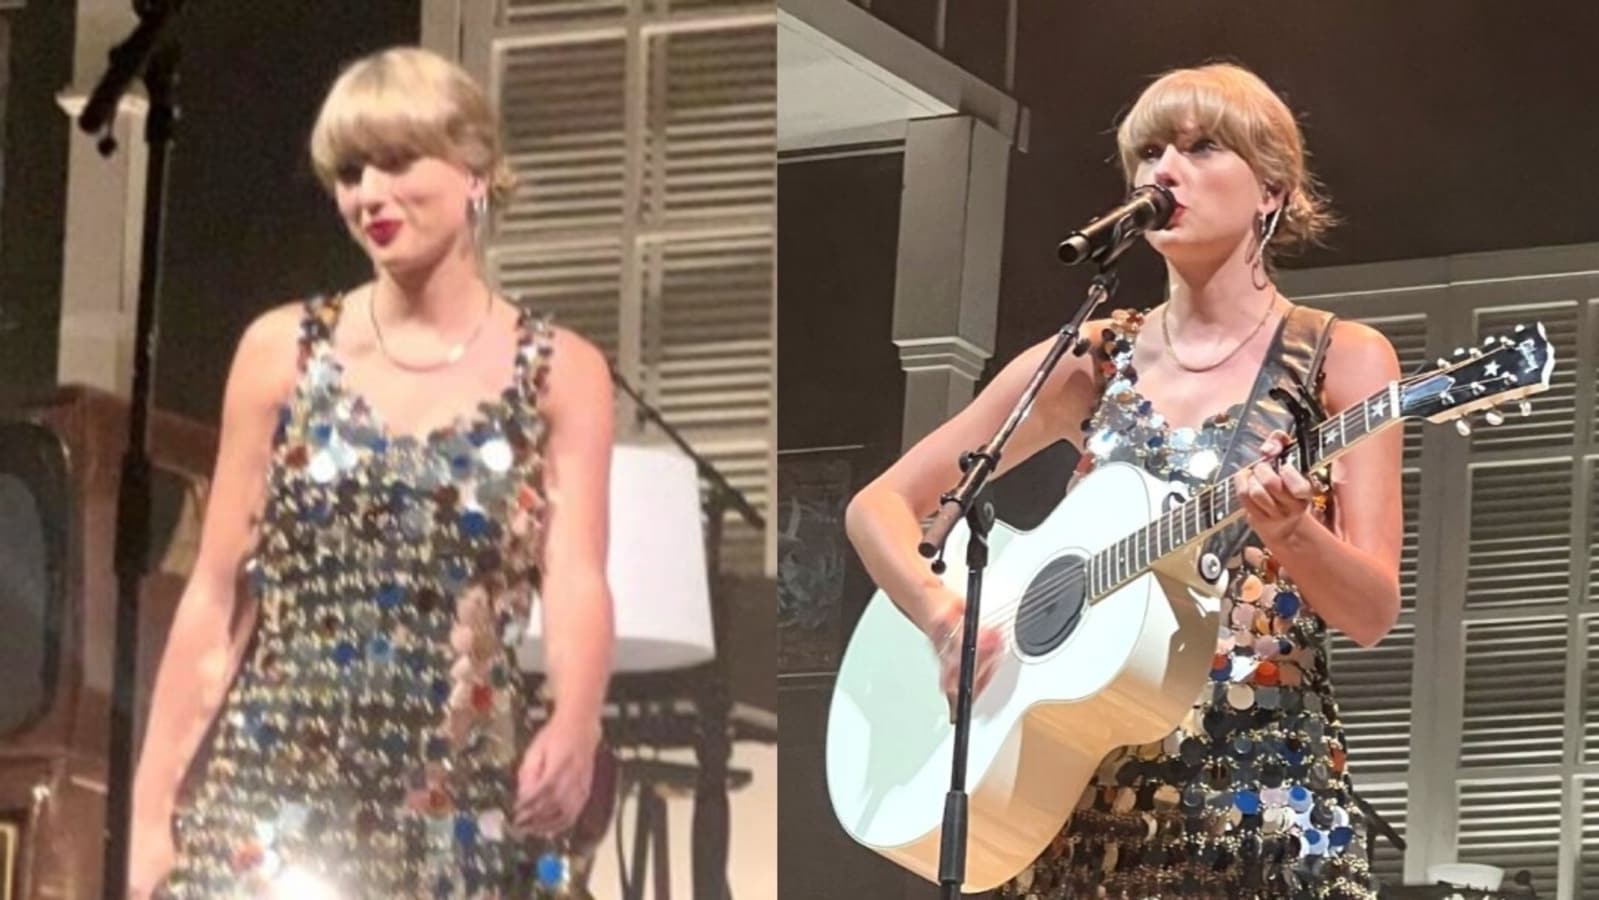 Taylor Swift surprises fans, performs AntiHero live for first time at